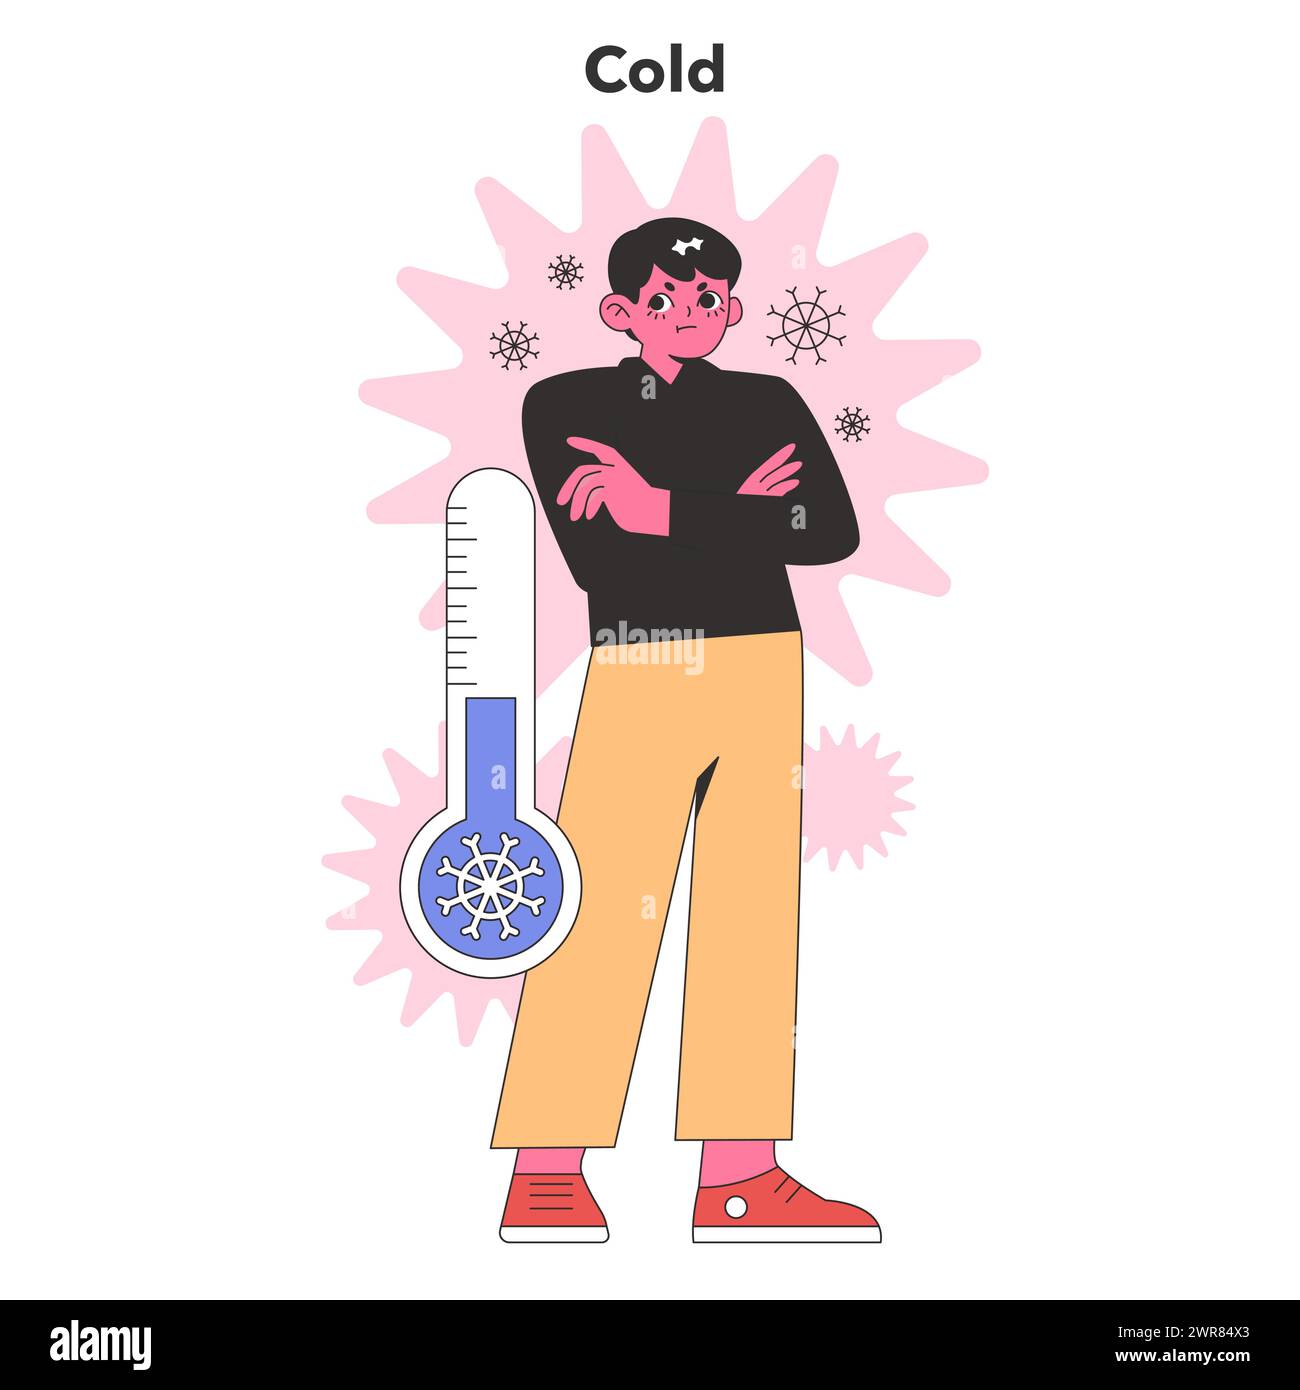 Cold Personality trait. An aloof character stands amidst symbolic frost, evoking feelings of emotional distance and chill. Flat vector illustration. Stock Vector